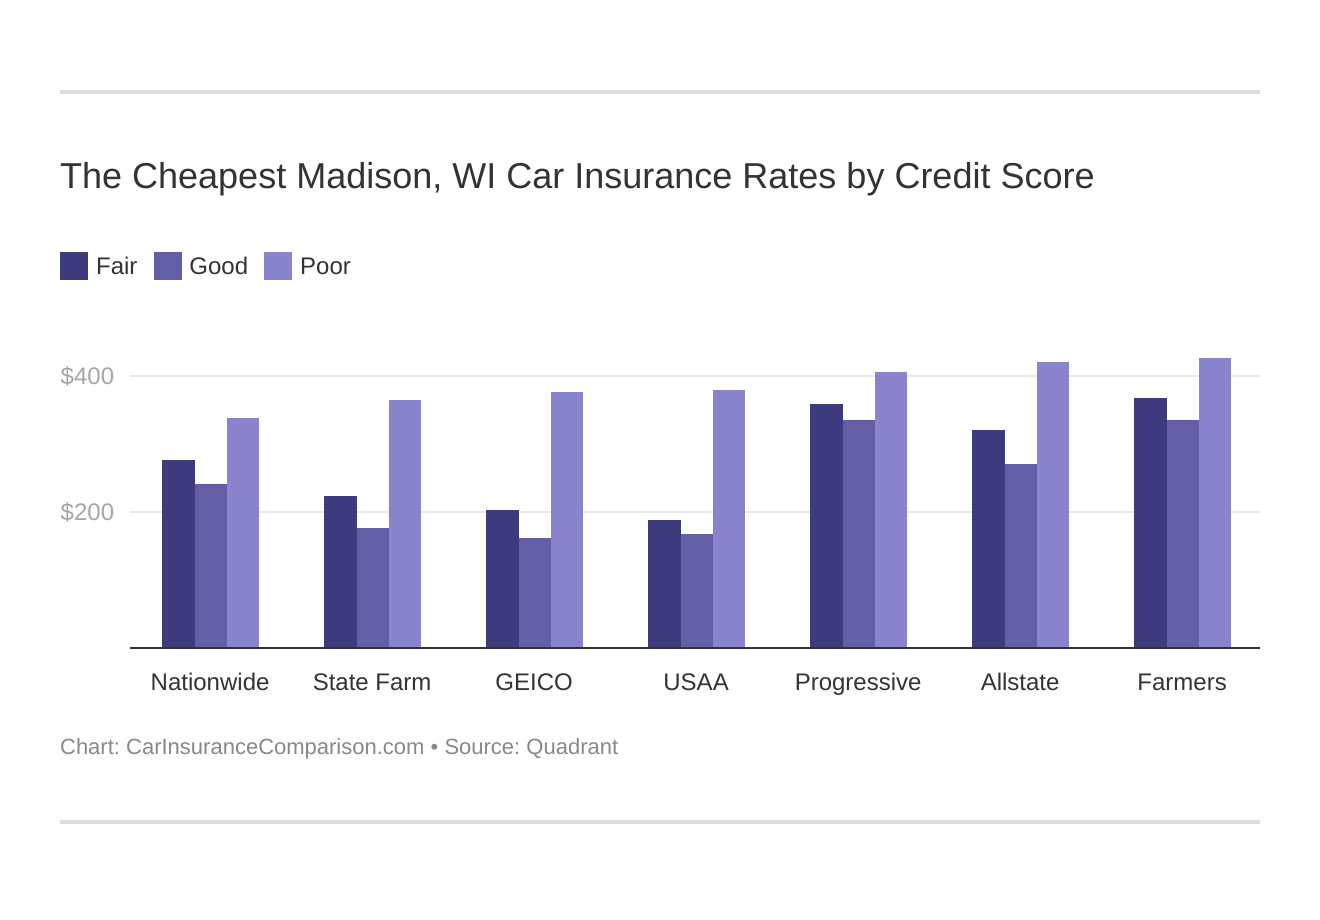 The Cheapest Madison, WI Car Insurance Rates by Credit Score